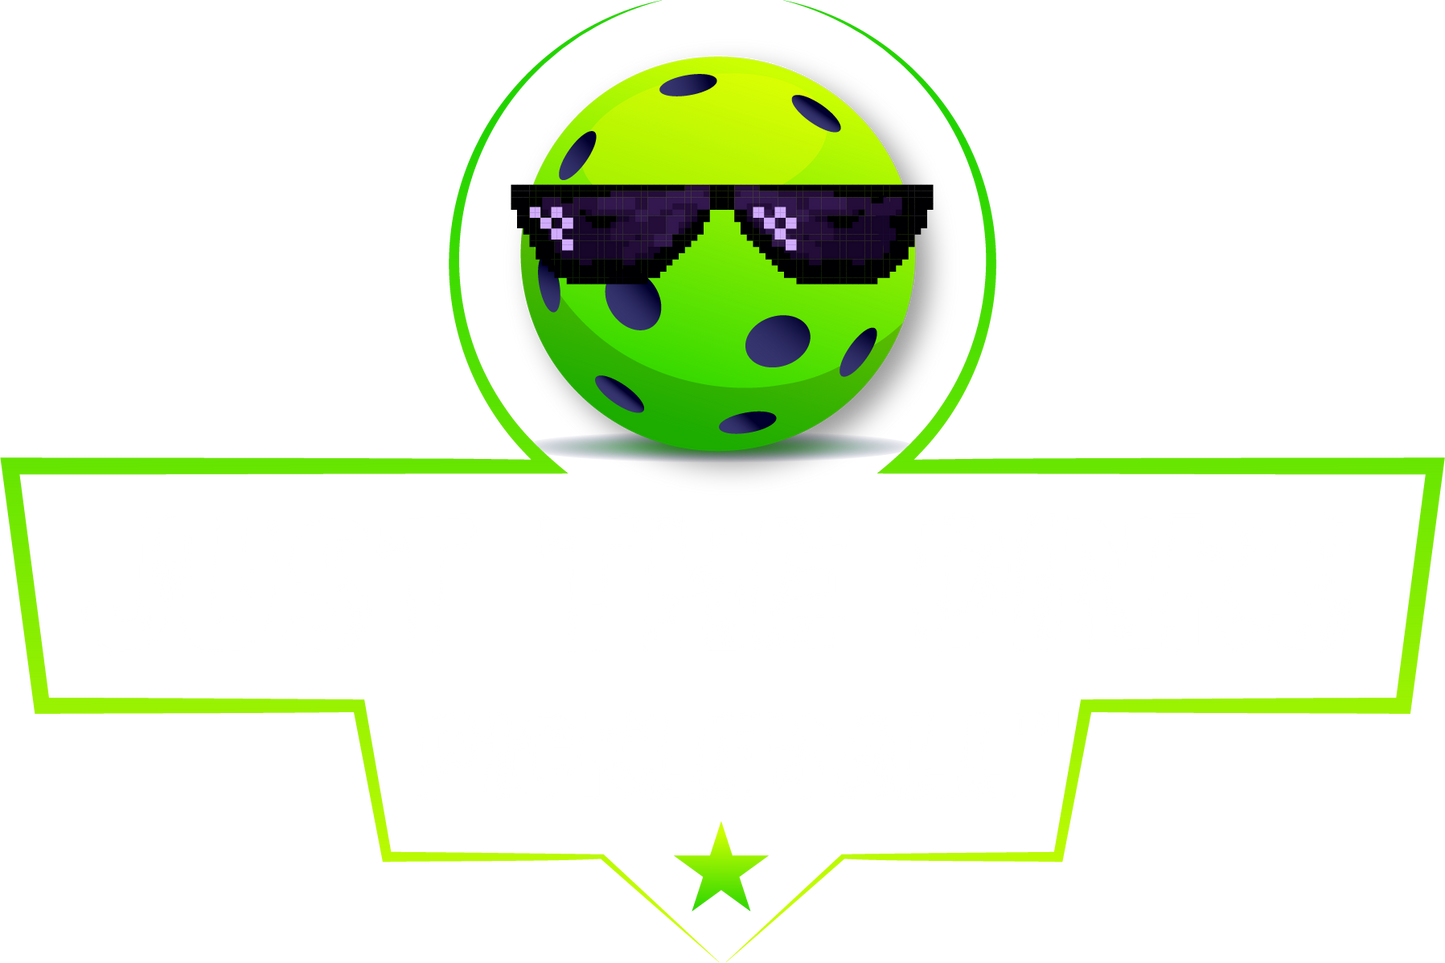 Just the Dinks Pickleball